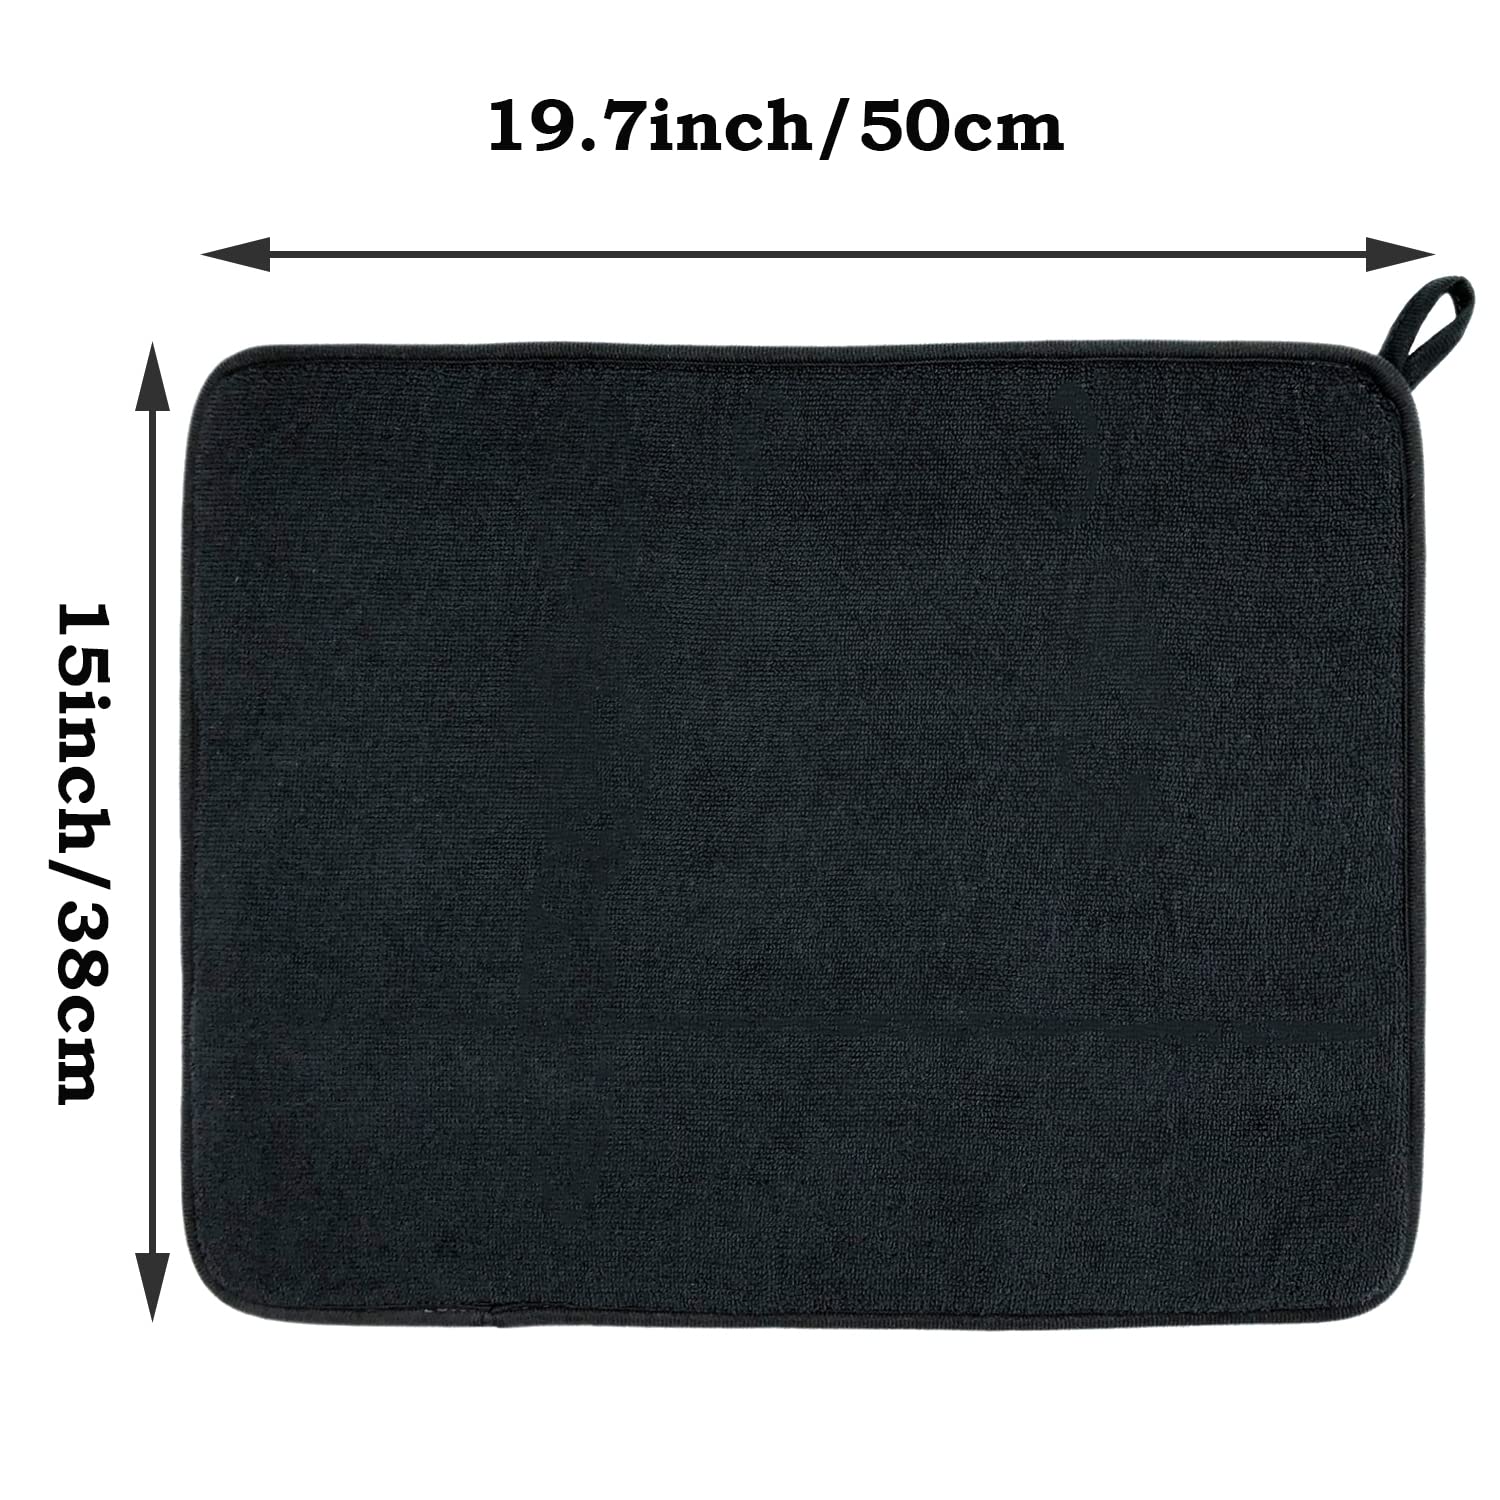 Dish Drying Mat for Kitchen Counter,Absorbent Drain Mats with Mircofiber,Dish Drying Pad,Double-Sided Use Dish Drainer Mat,19"x15",2 Pack,Dark Gray